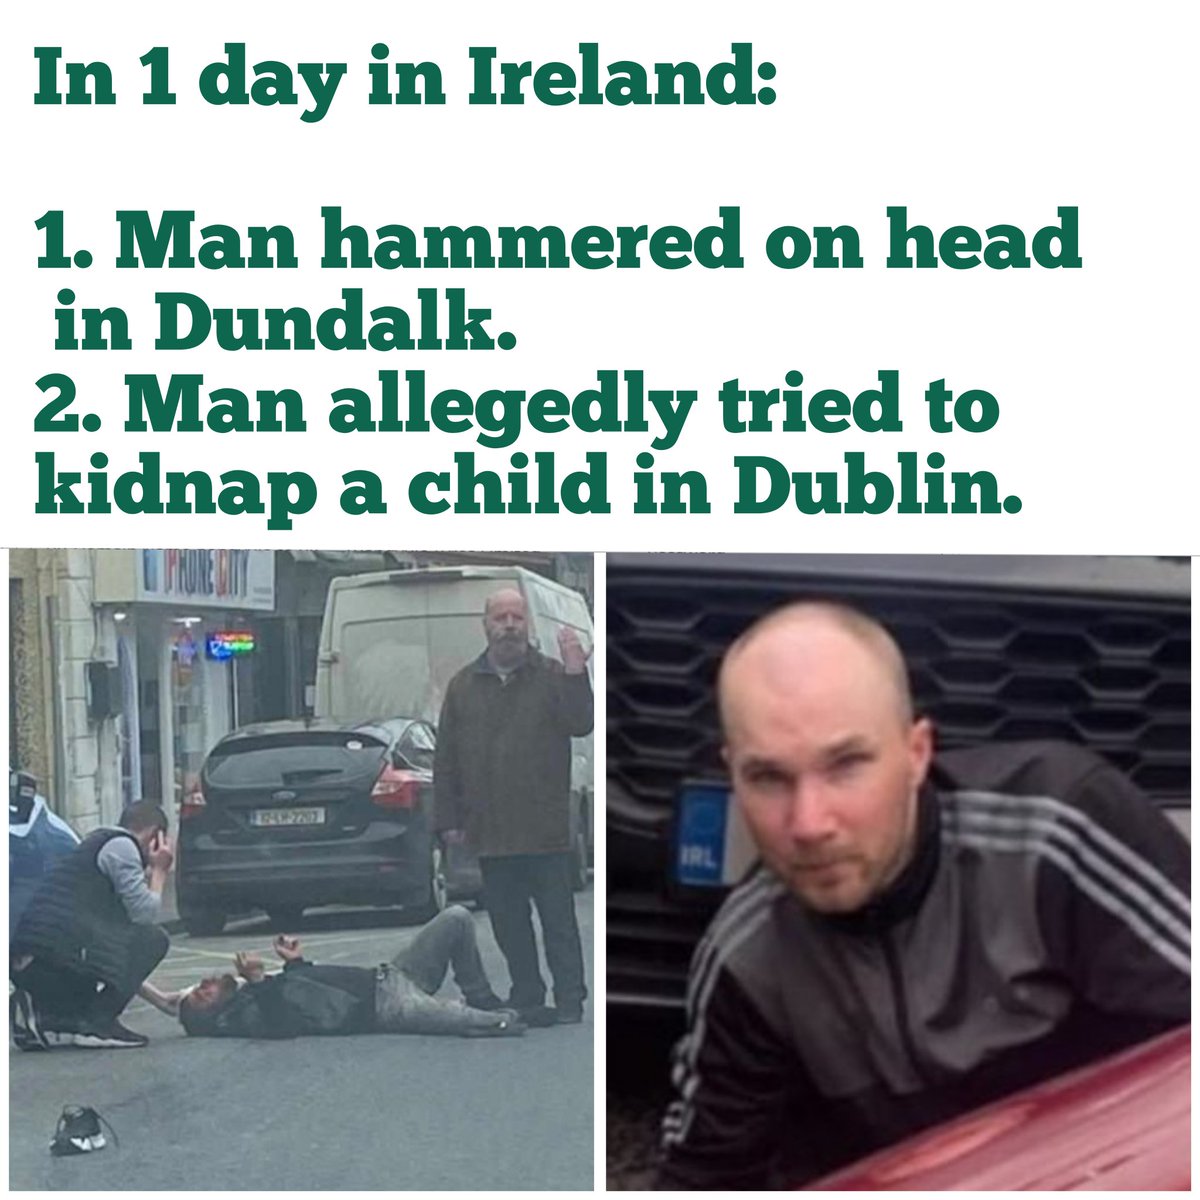 The decisons of @rodericogorman and @HMcEntee are making our streets less safe with mass immigration. #Dundalk Replace the politicians before they damage Irish society even more. #Irishfreedom